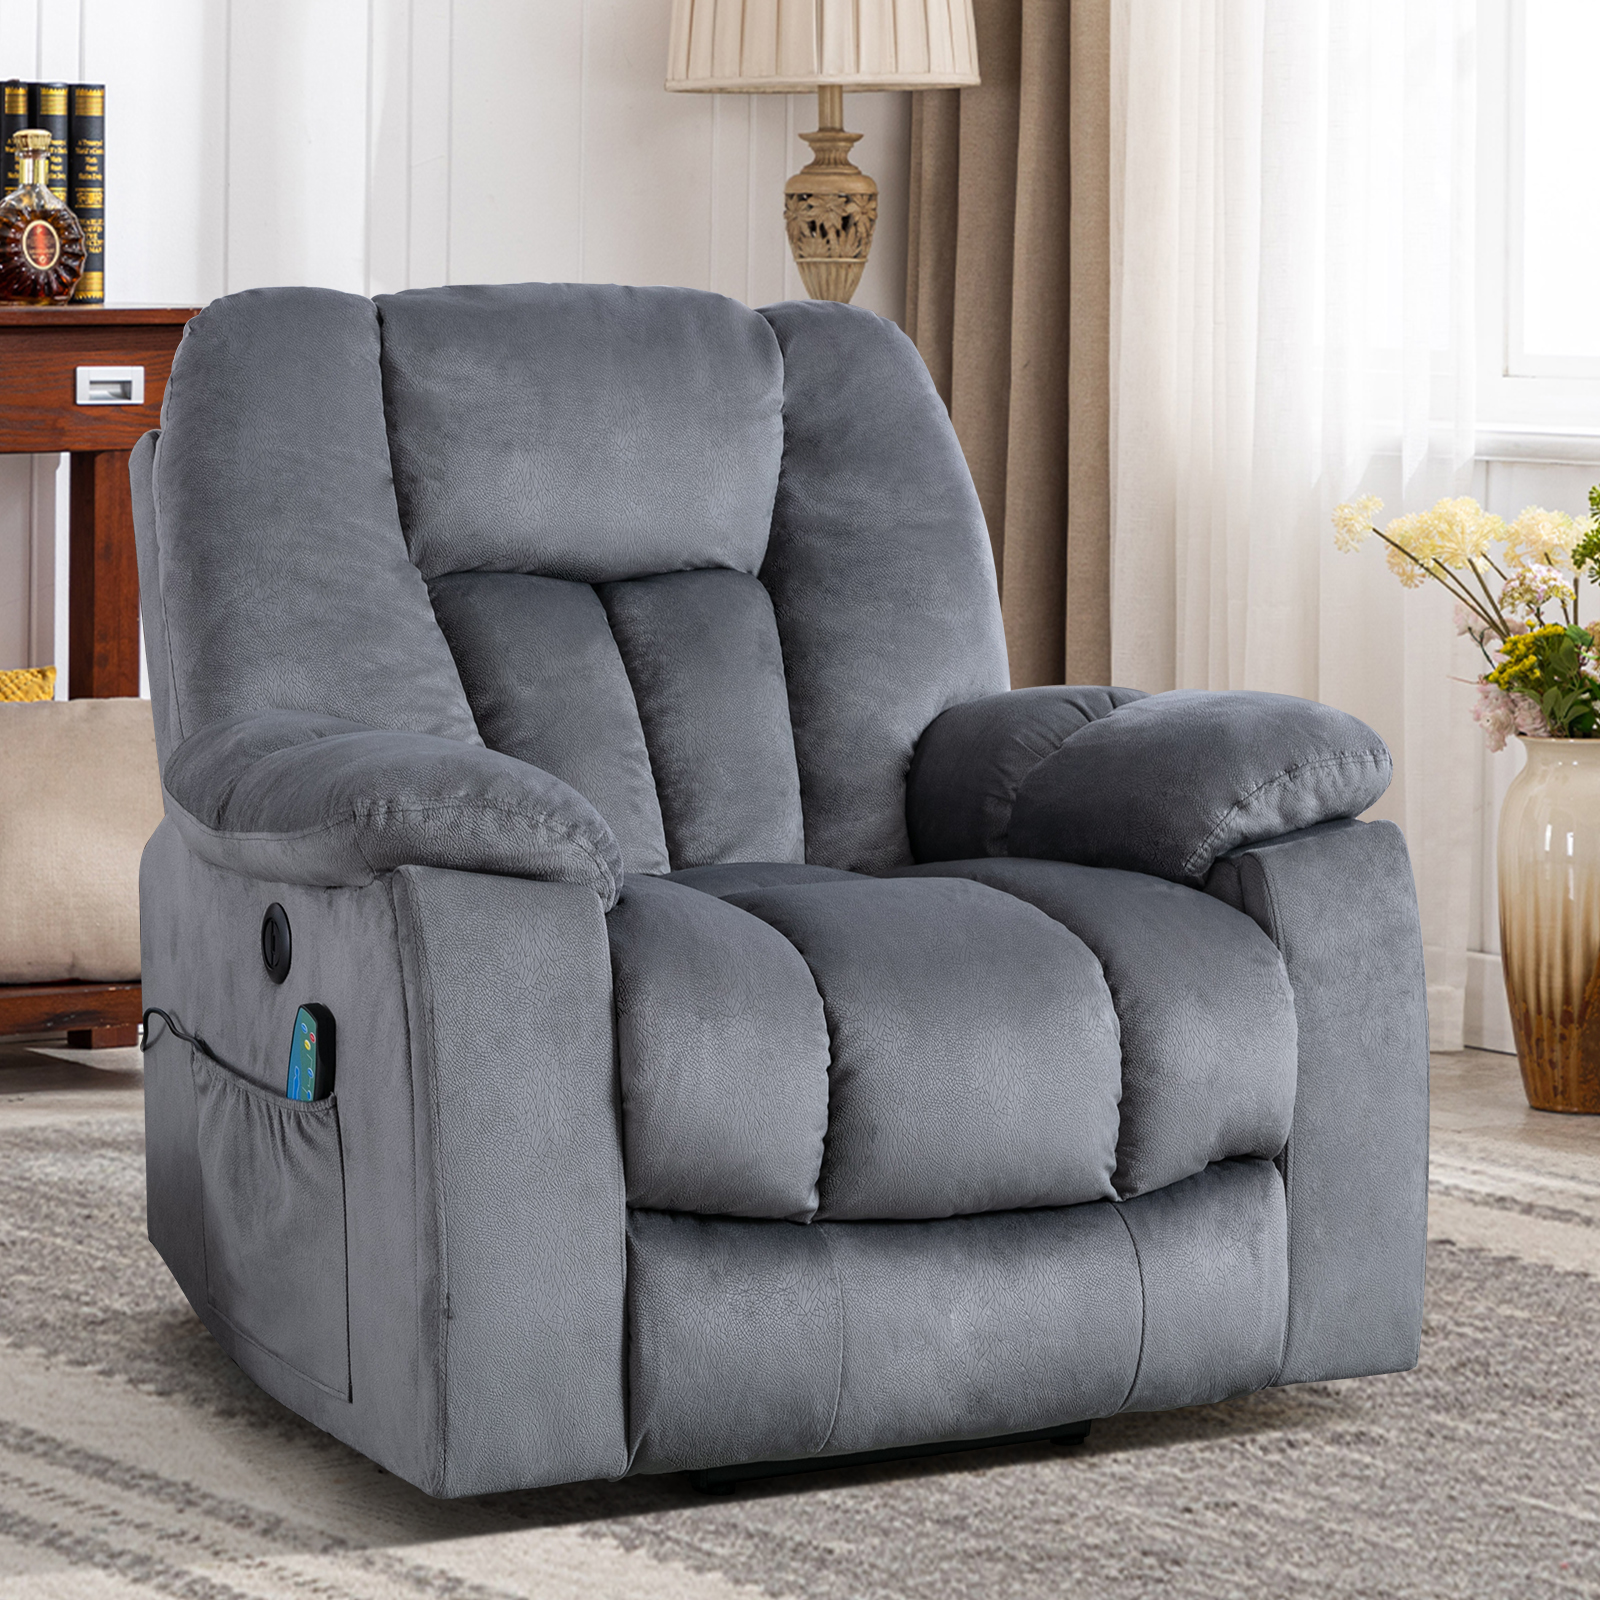 BonzyHome Large Lift Recliner with Massage and Heat, Oversized Wide , Chenille Gray - image 4 of 10